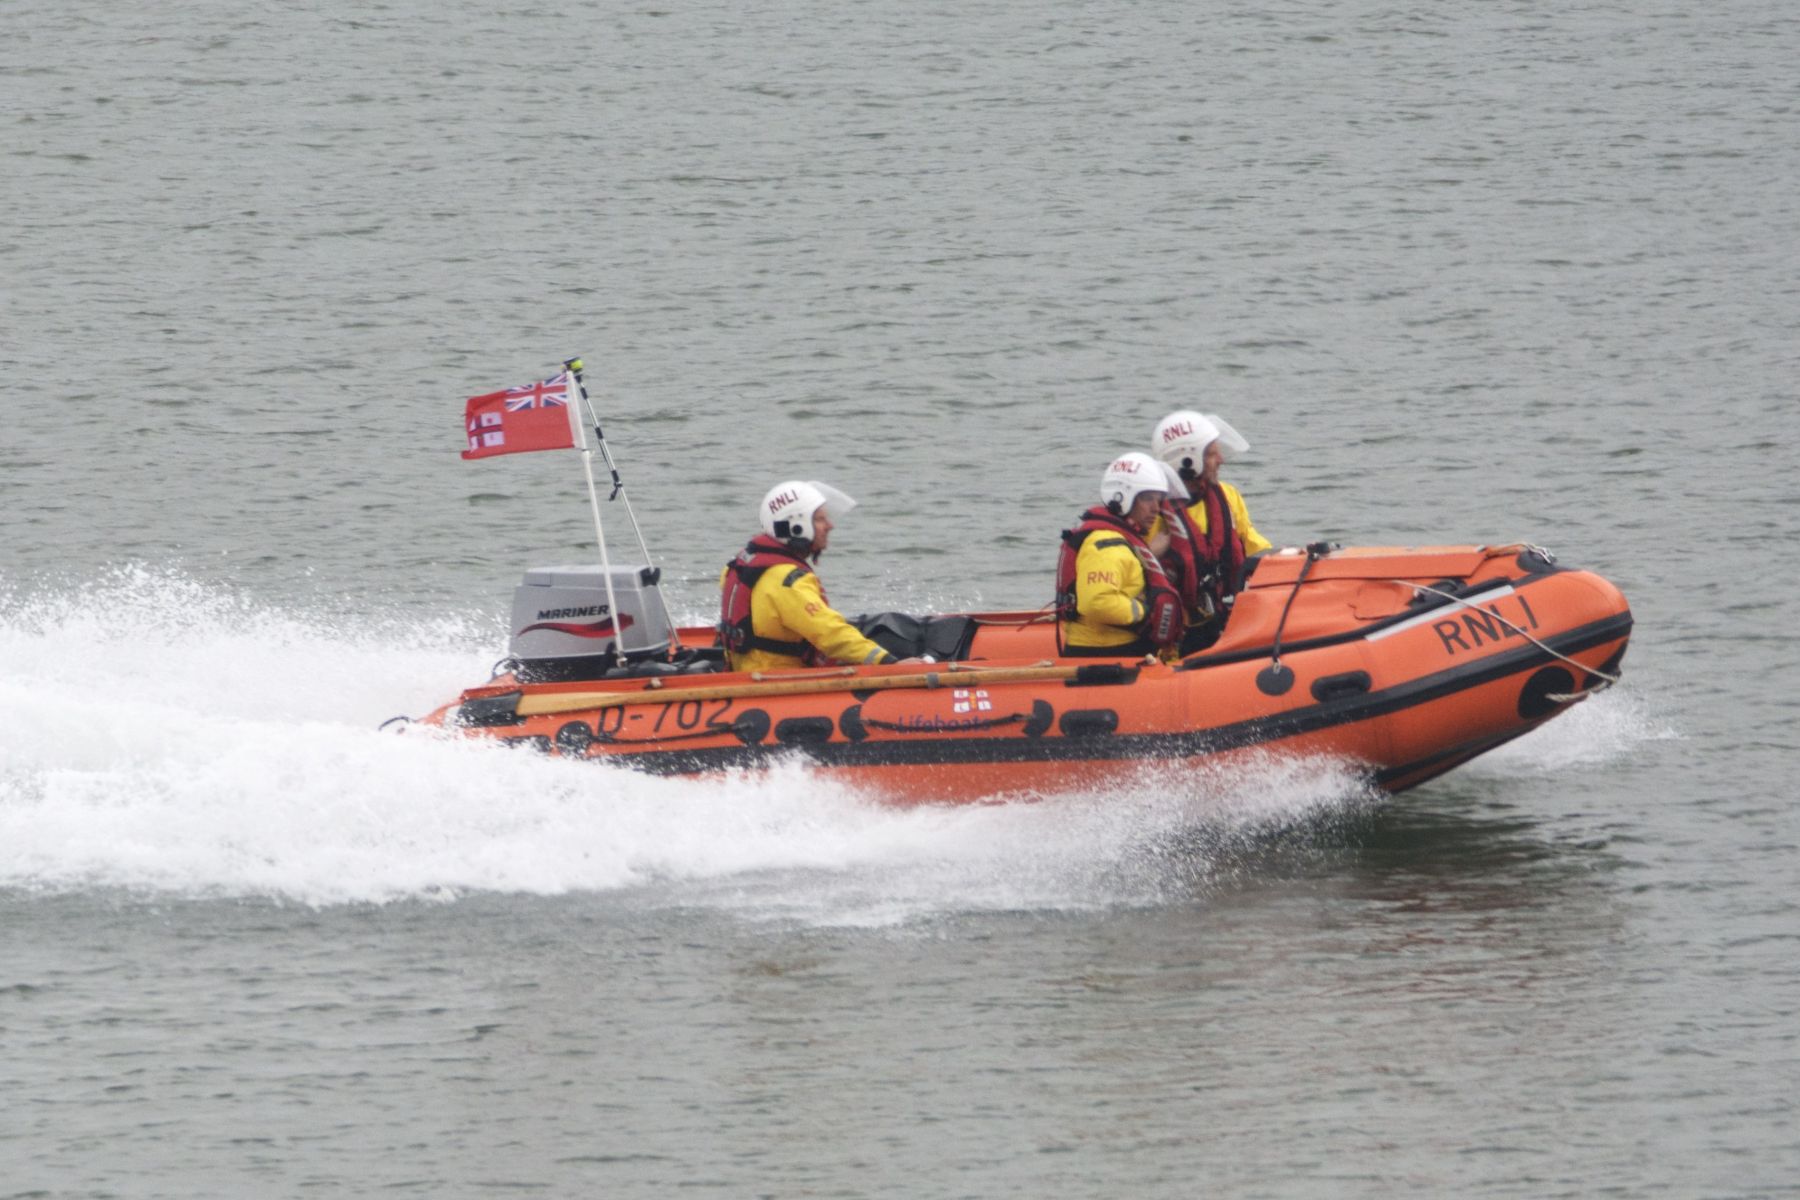 Dart RNLI D class lifeboat responding to report of a family trapped near Blackpool Sands